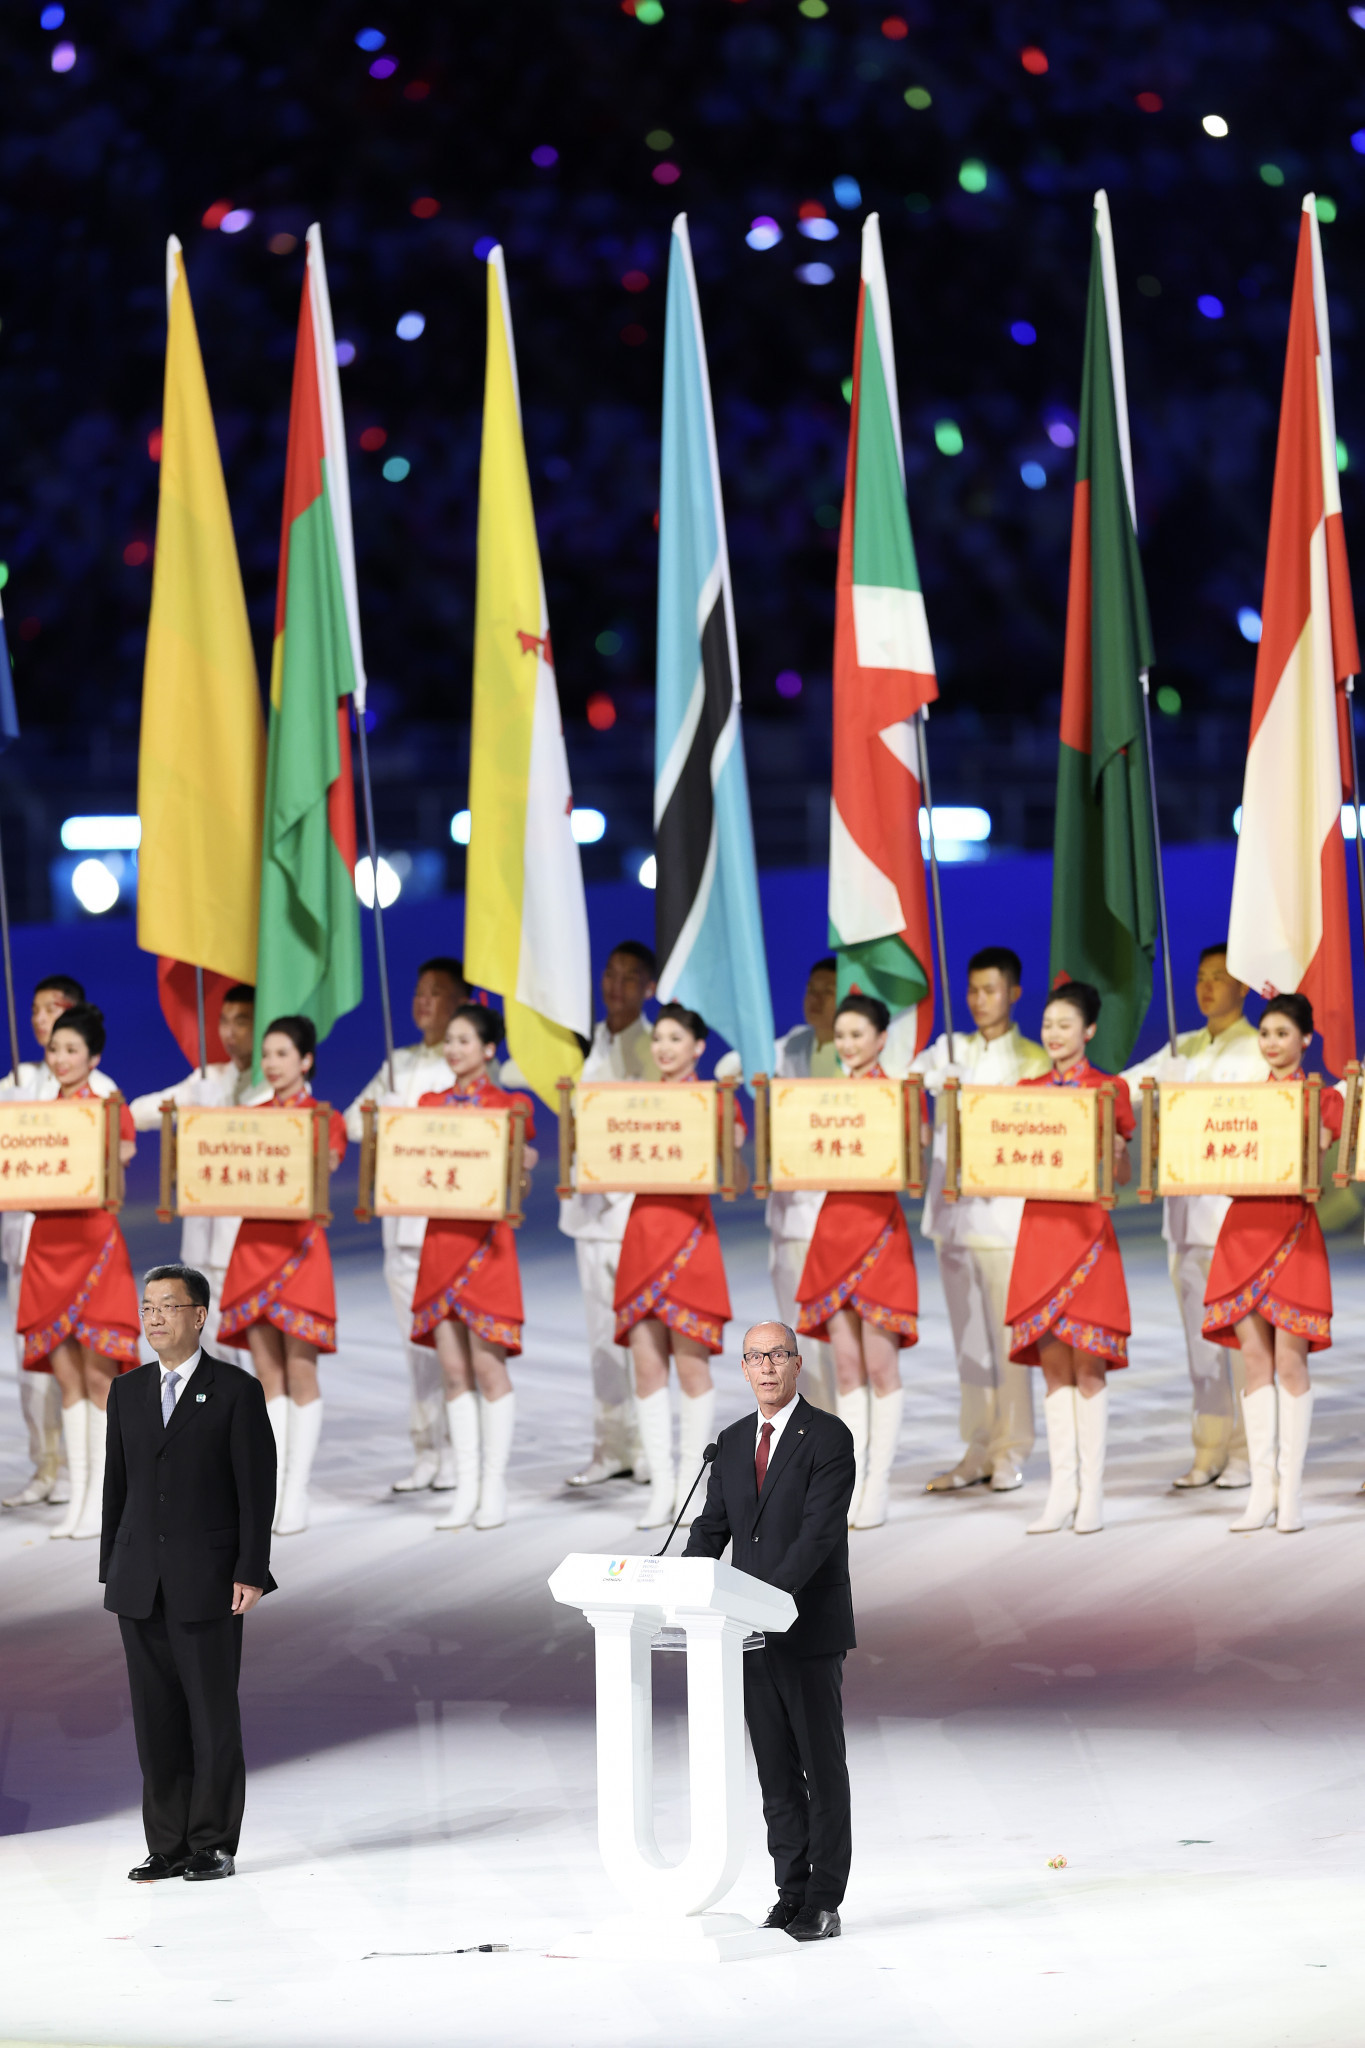 FISU Acting President Leonz Eder praised athletes for their patience, and said 